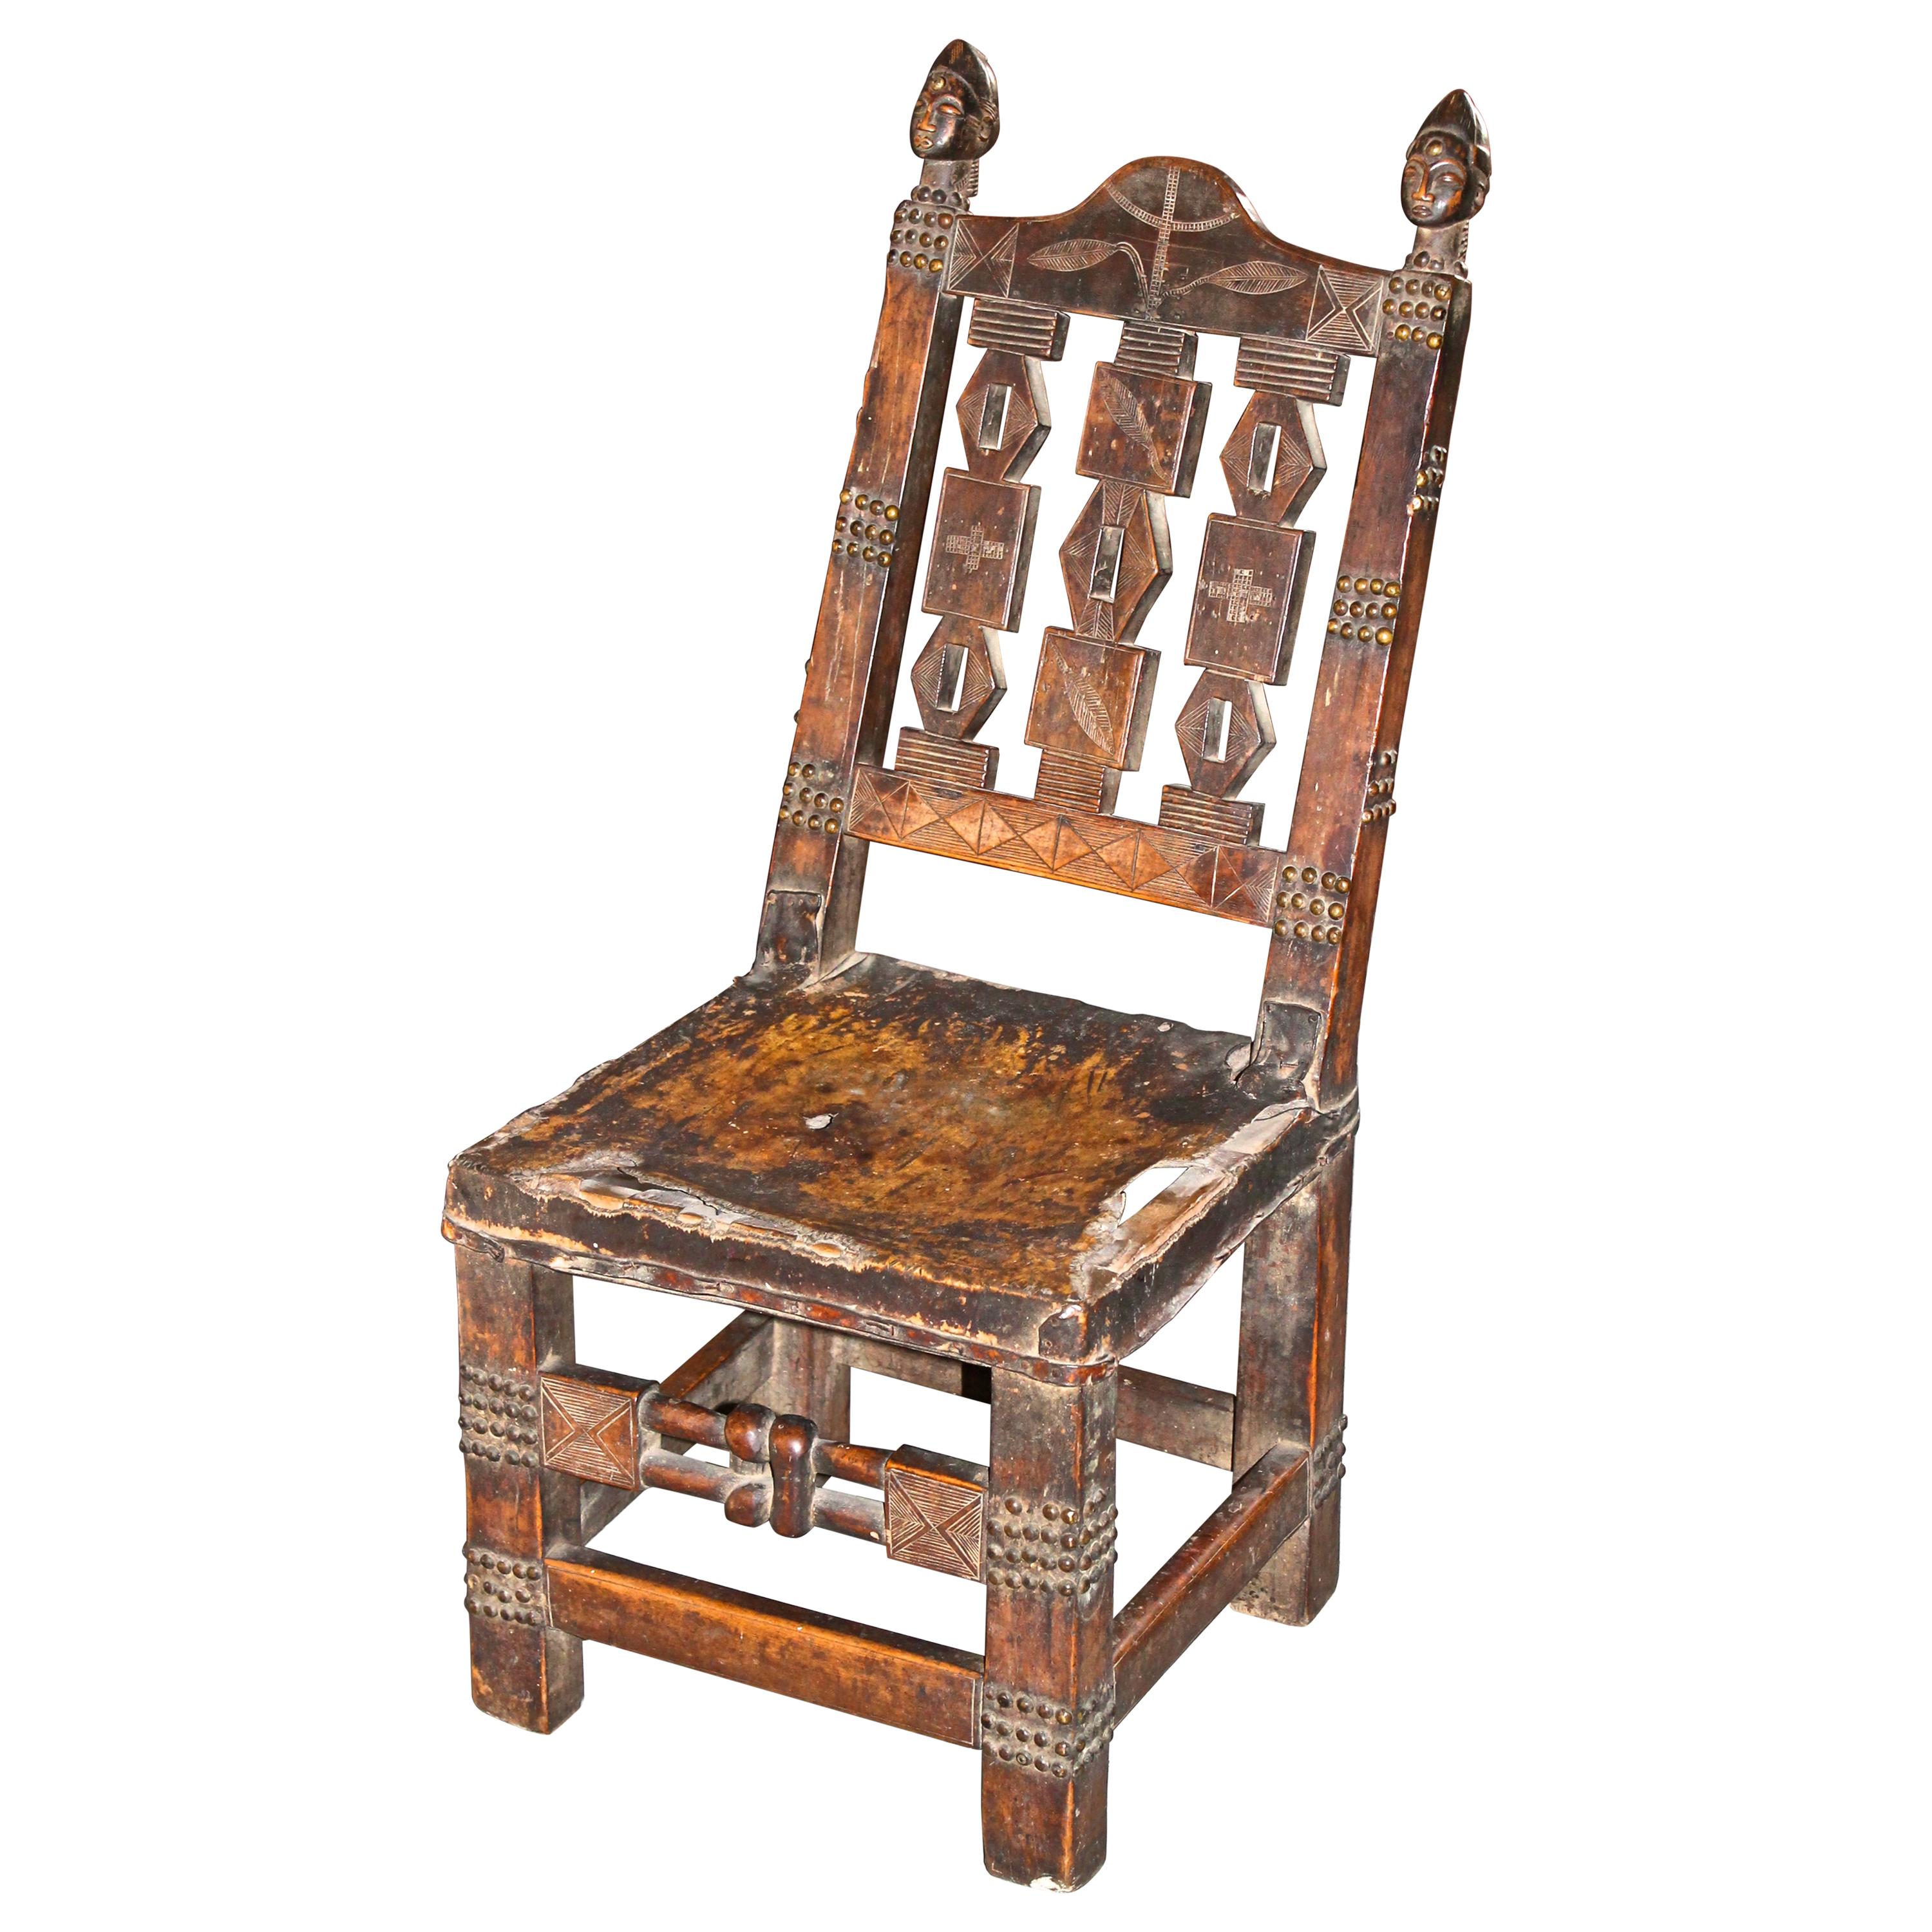  Baule Chair 19th Century from the Ivory Coast